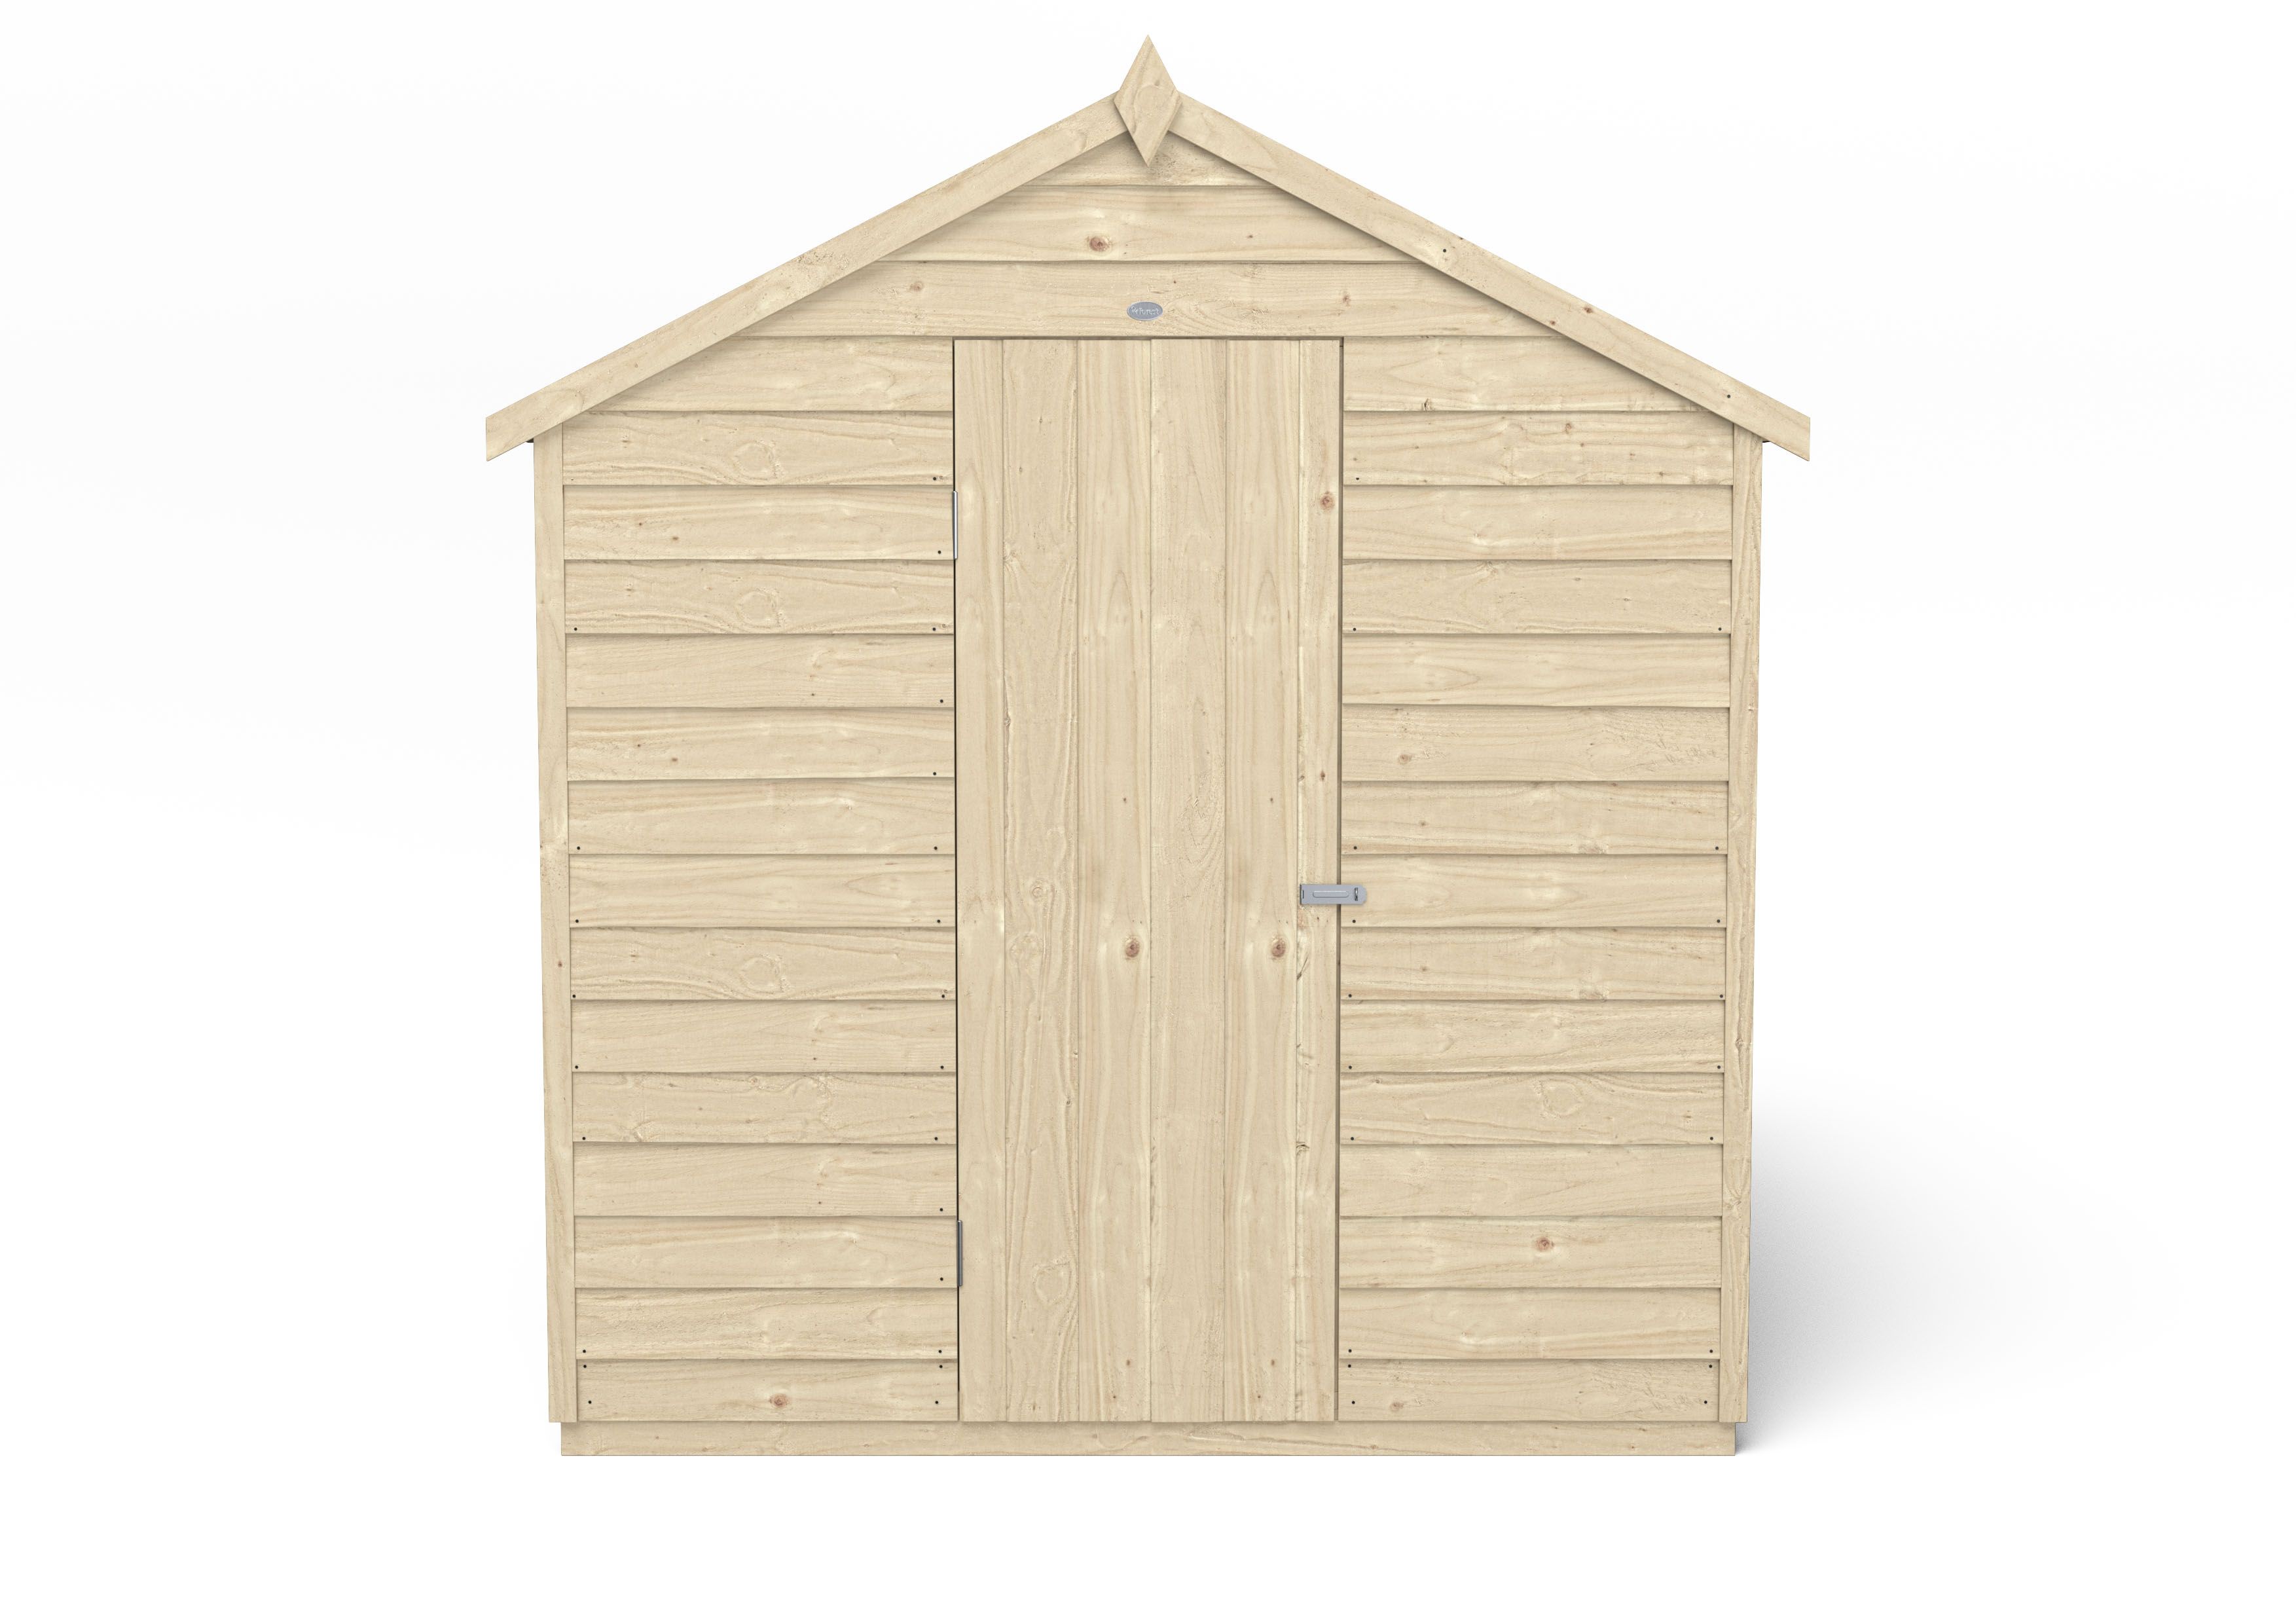 Forest Garden Overlap 8x6 ft Apex Wooden Pressure treated Shed with floor & 2 windows (Base included) - Assembly service included